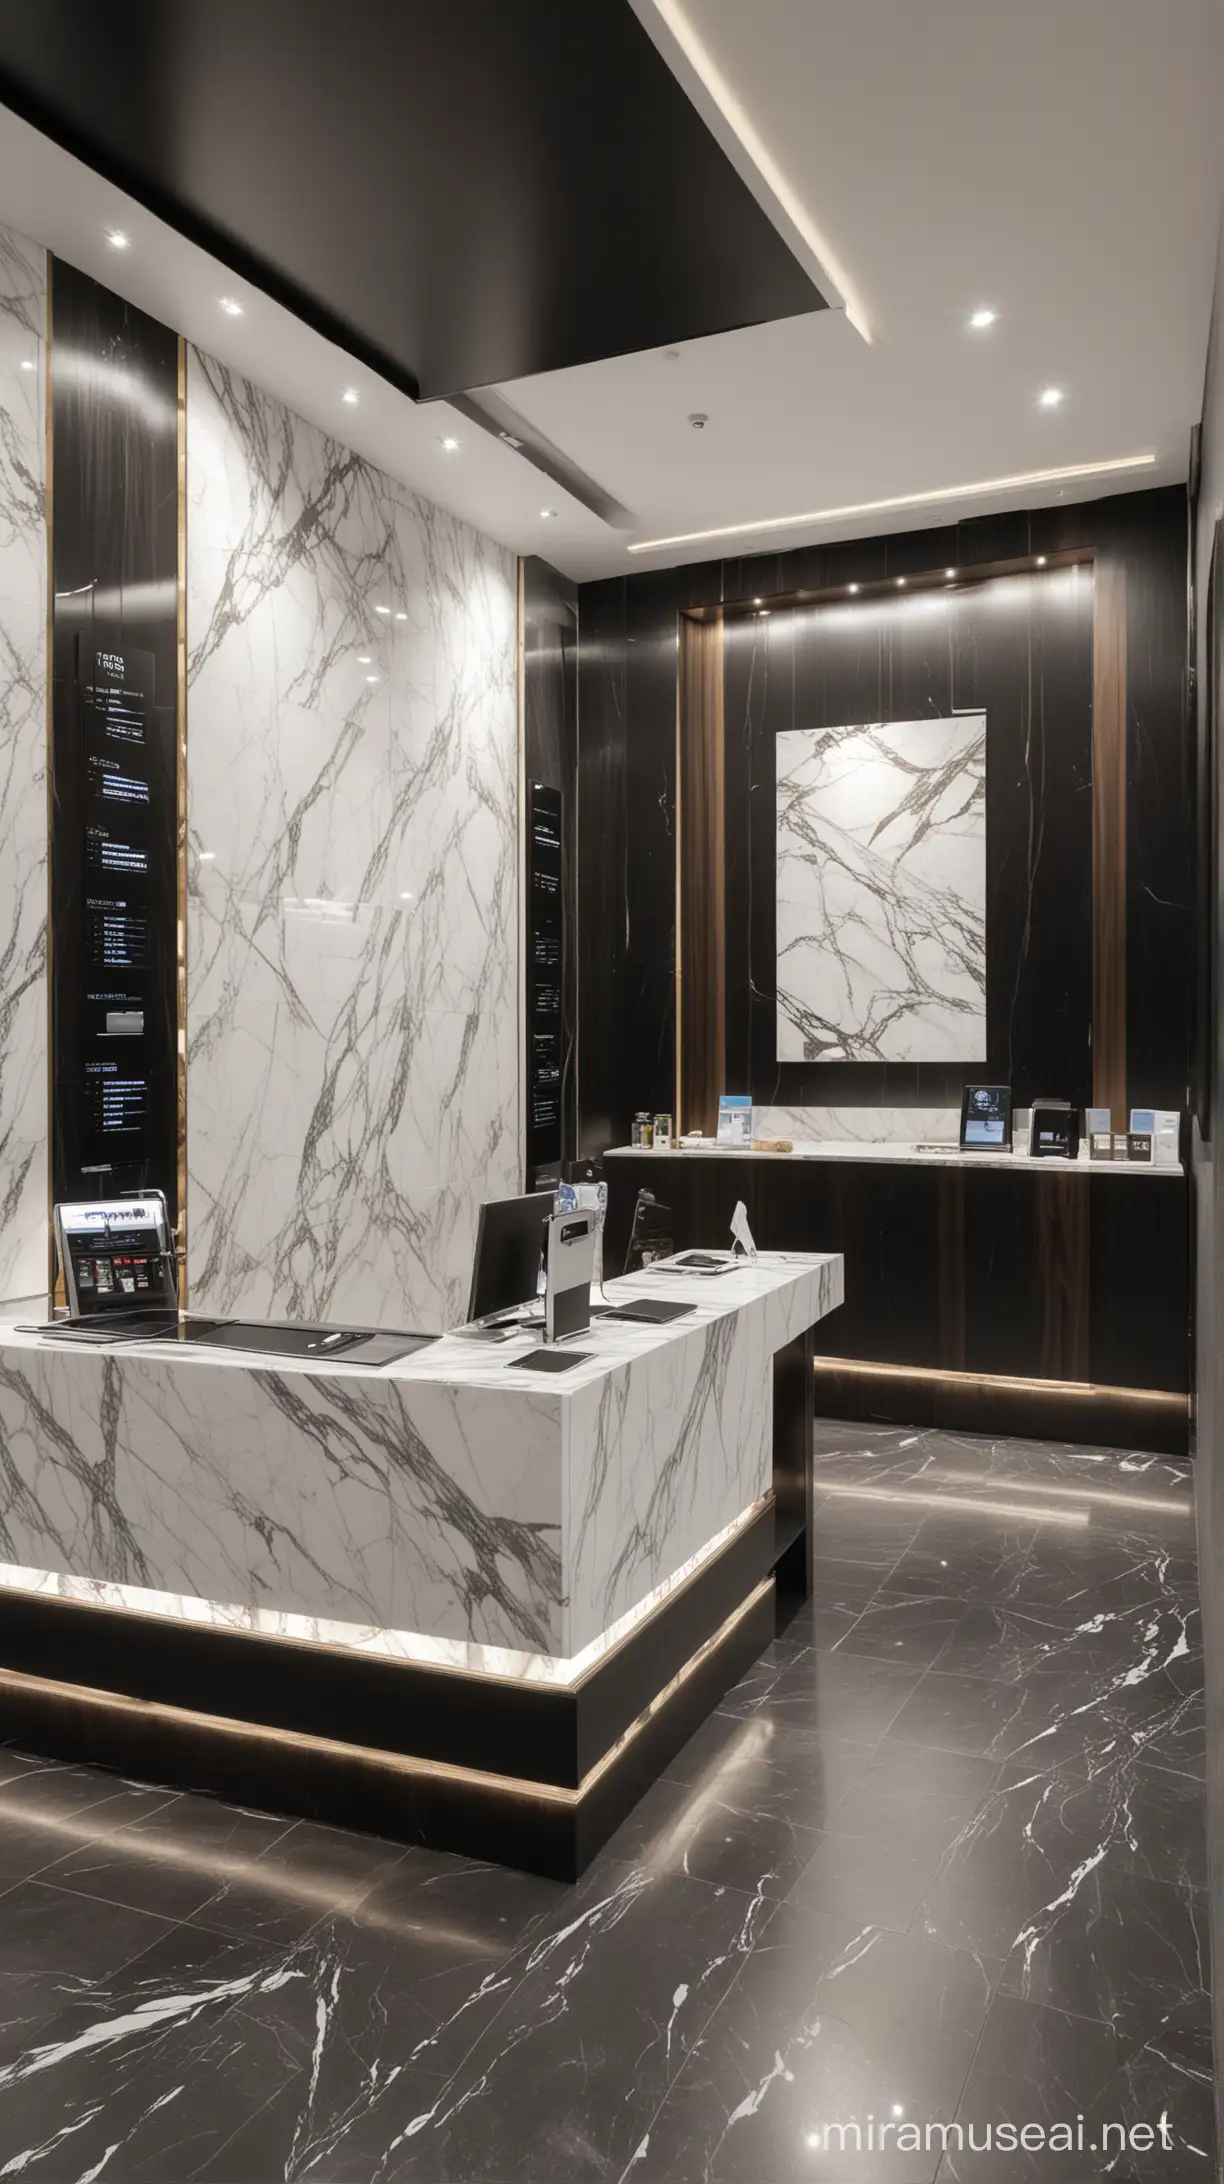 money transfer shop,cellphone,ultra modern design,floor,marble white and black , special reception by black color,wood wall